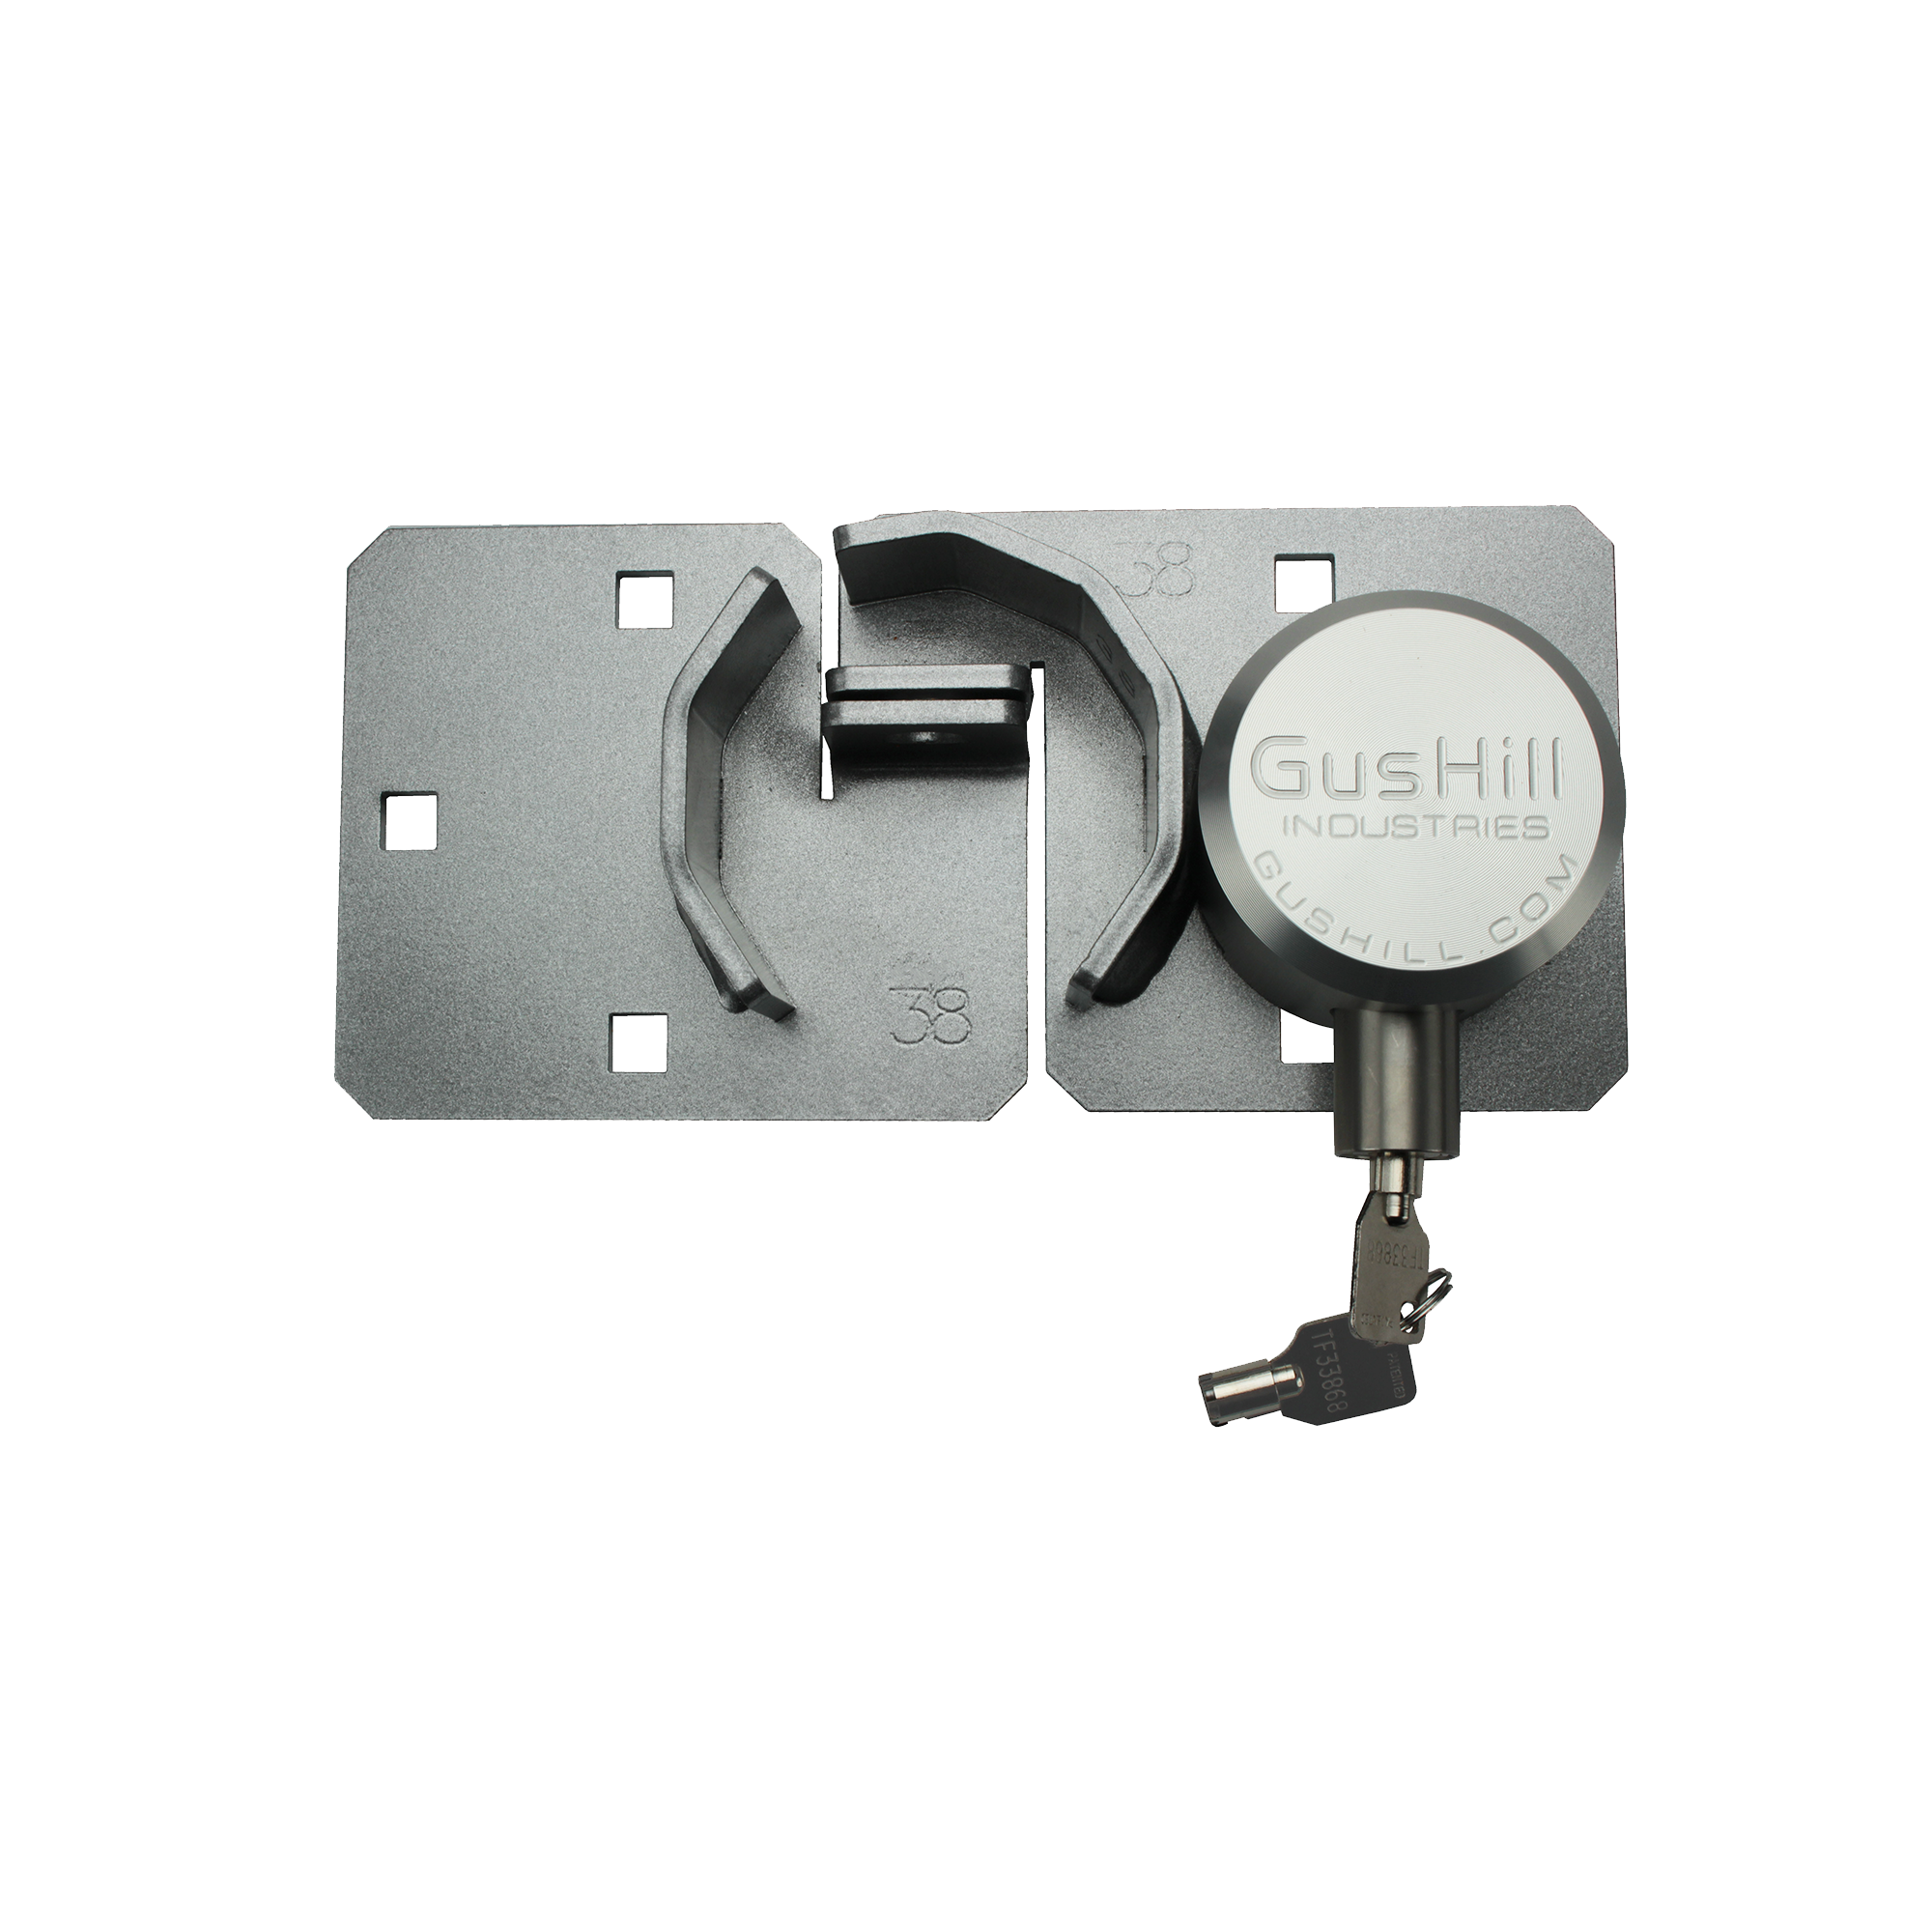 The Hasp (vertical key)